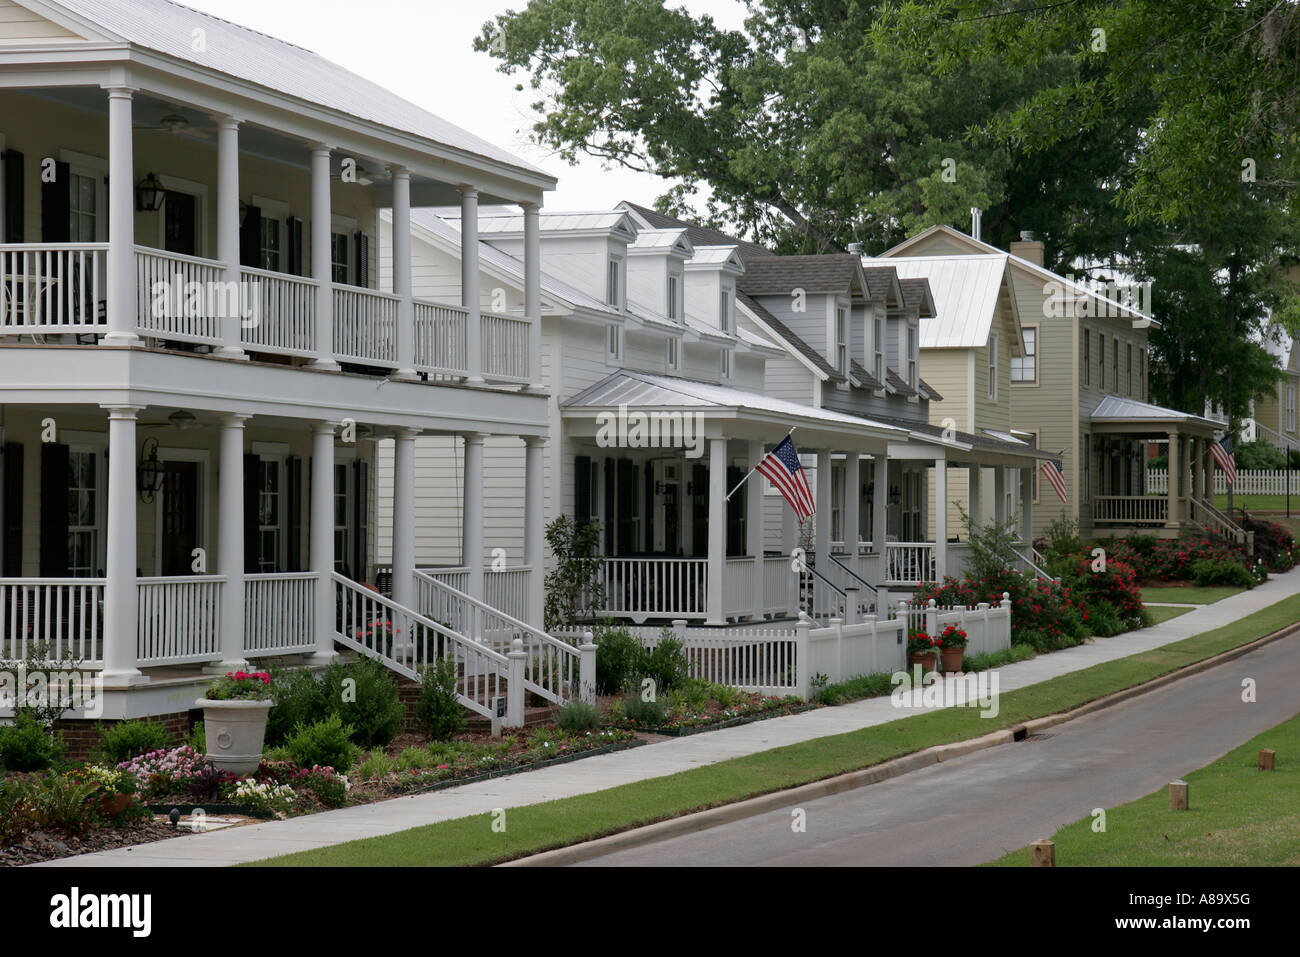 Alabama Pike Road,The Waters,planned community,new homes,traditional Americana architecture,porches,visitors travel traveling tour tourist tourism lan Stock Photo